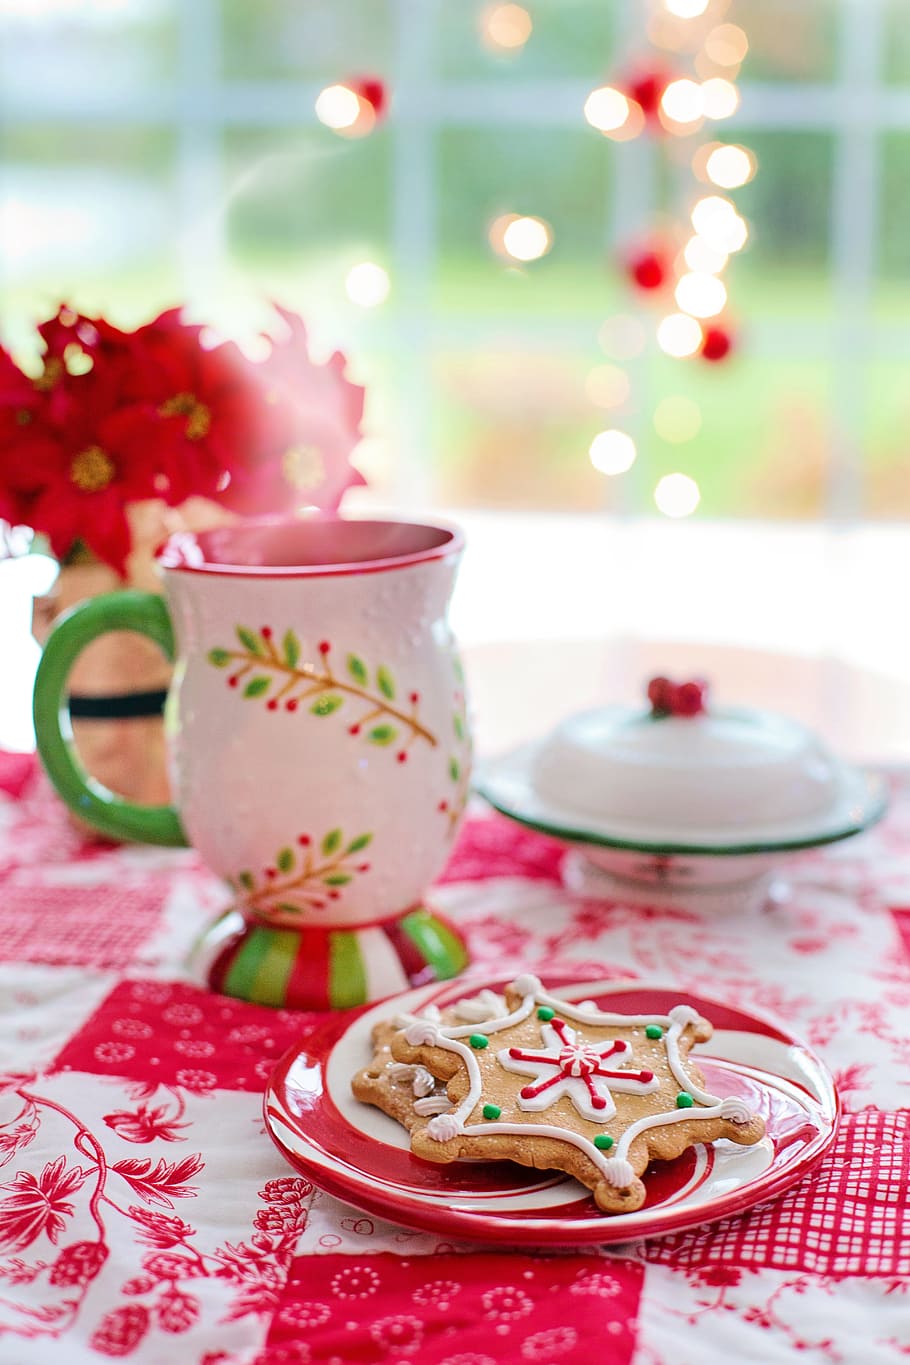 food photography, cookies, served, red, ceramic, plate, christmas, hot chocolate, hot cocoa, green colorful